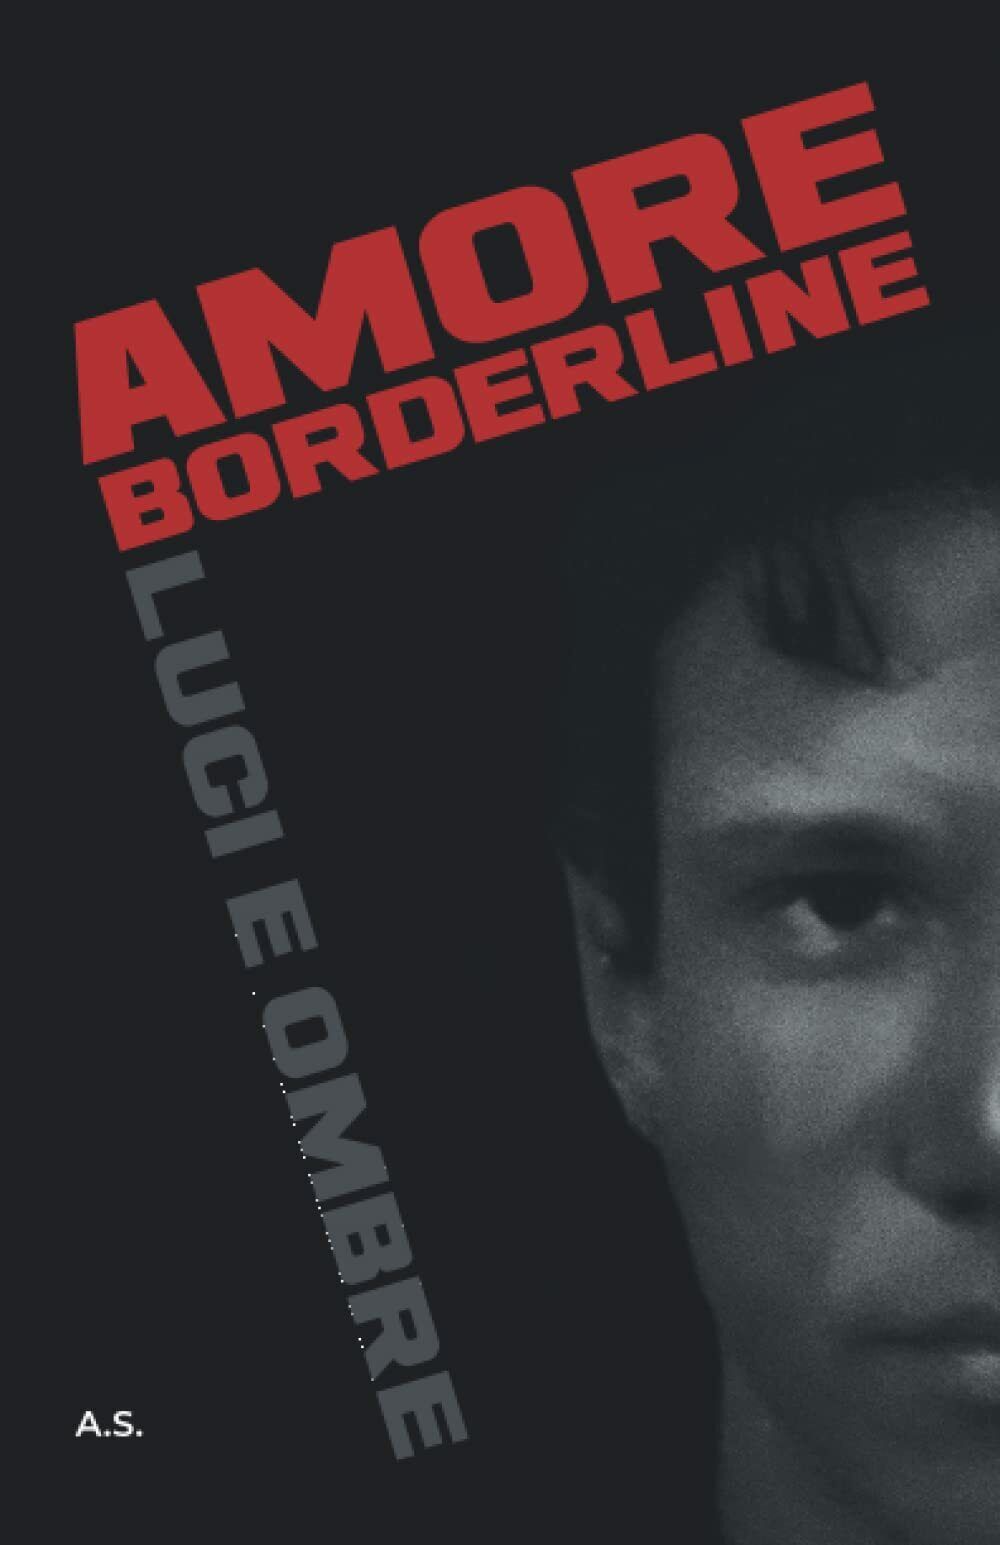 Amore borderline: Luci e ombre di A. S.,  2022,  Indipendently Published